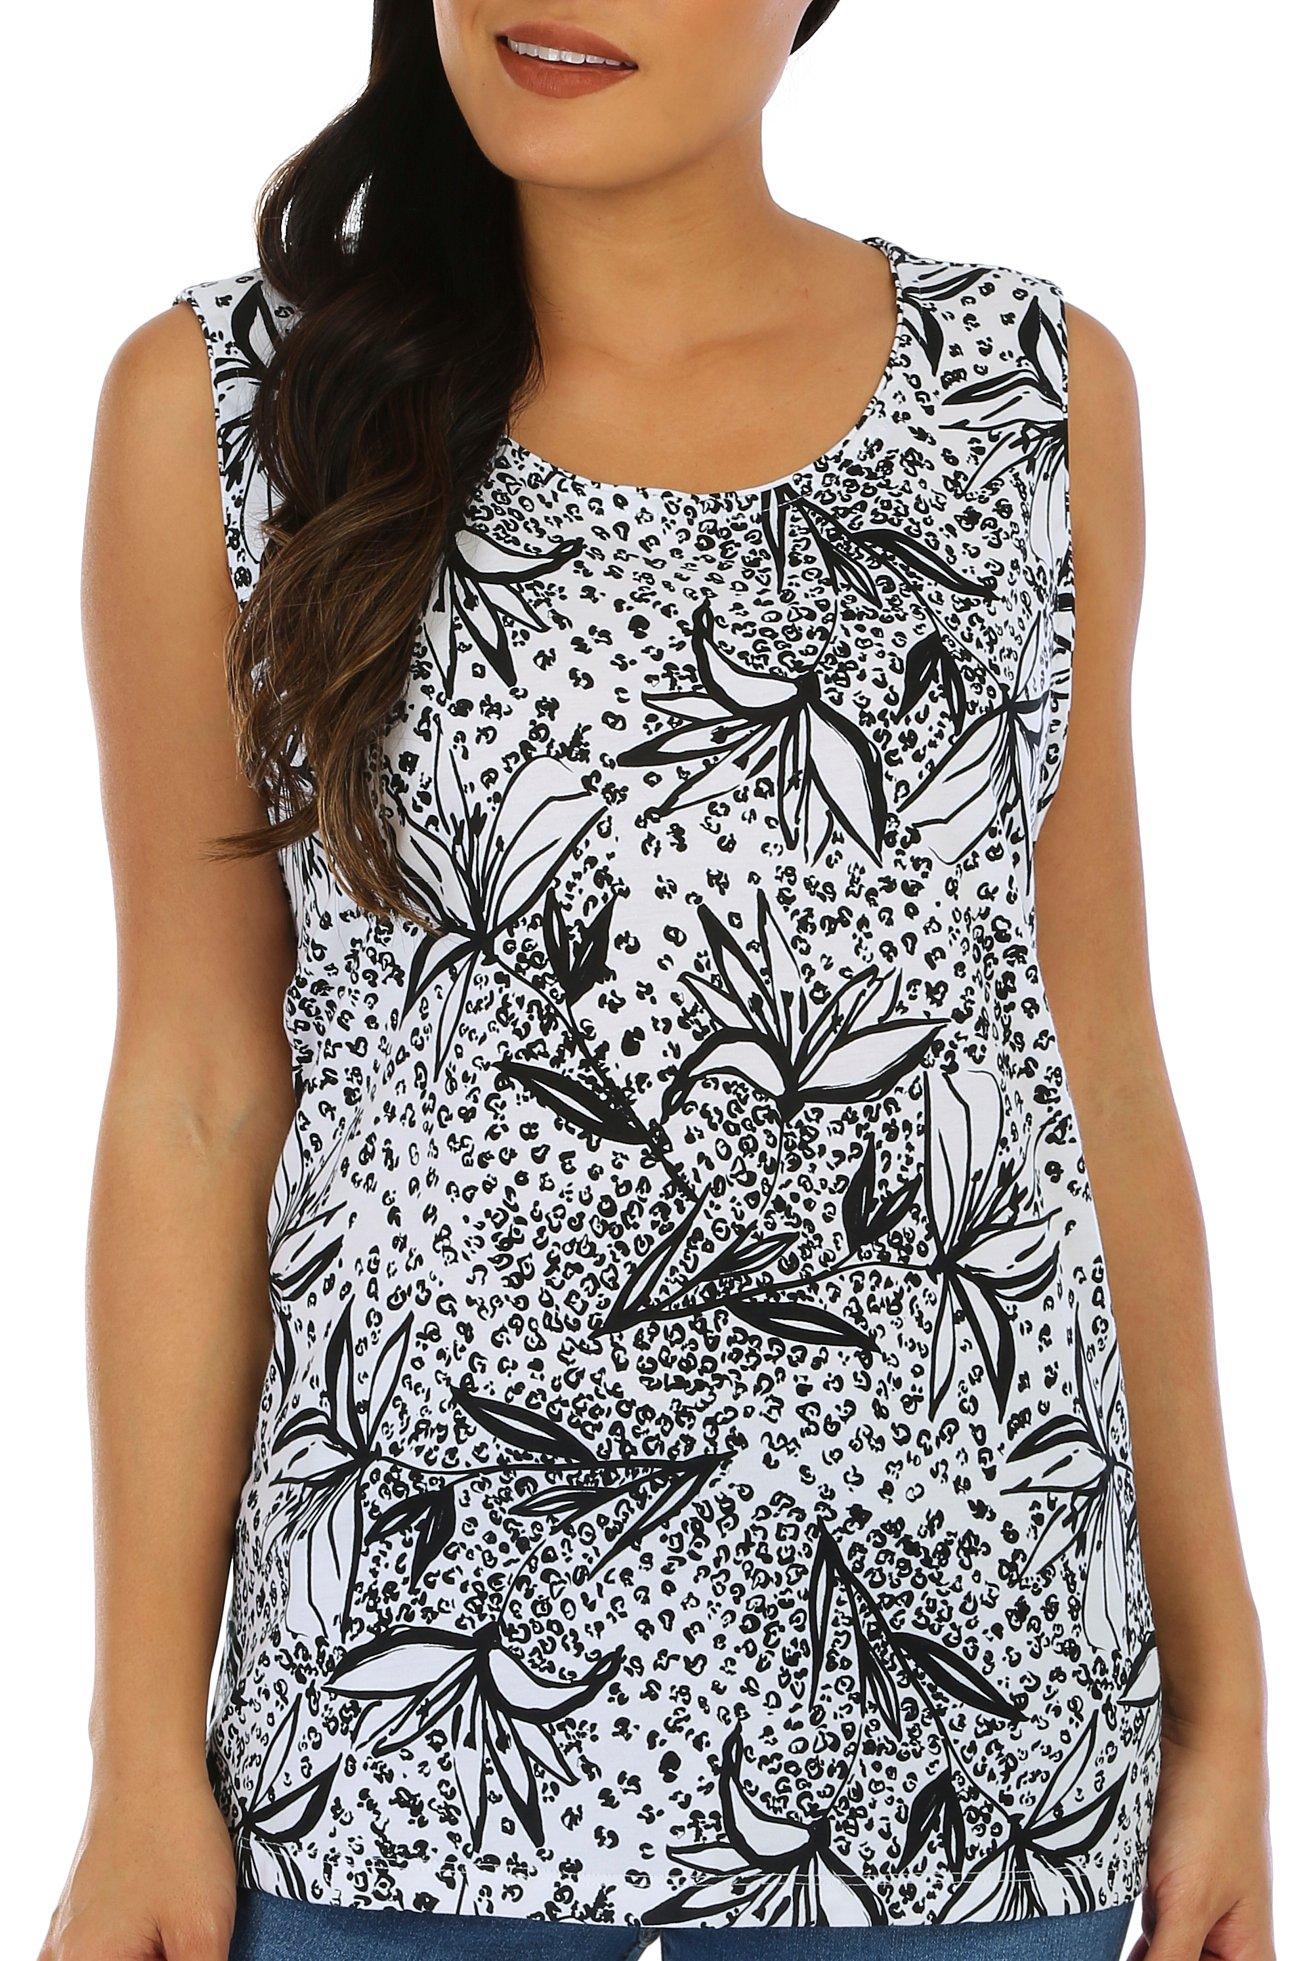 Coral Bay Womens Floral Print Scoop Neck Tank Top